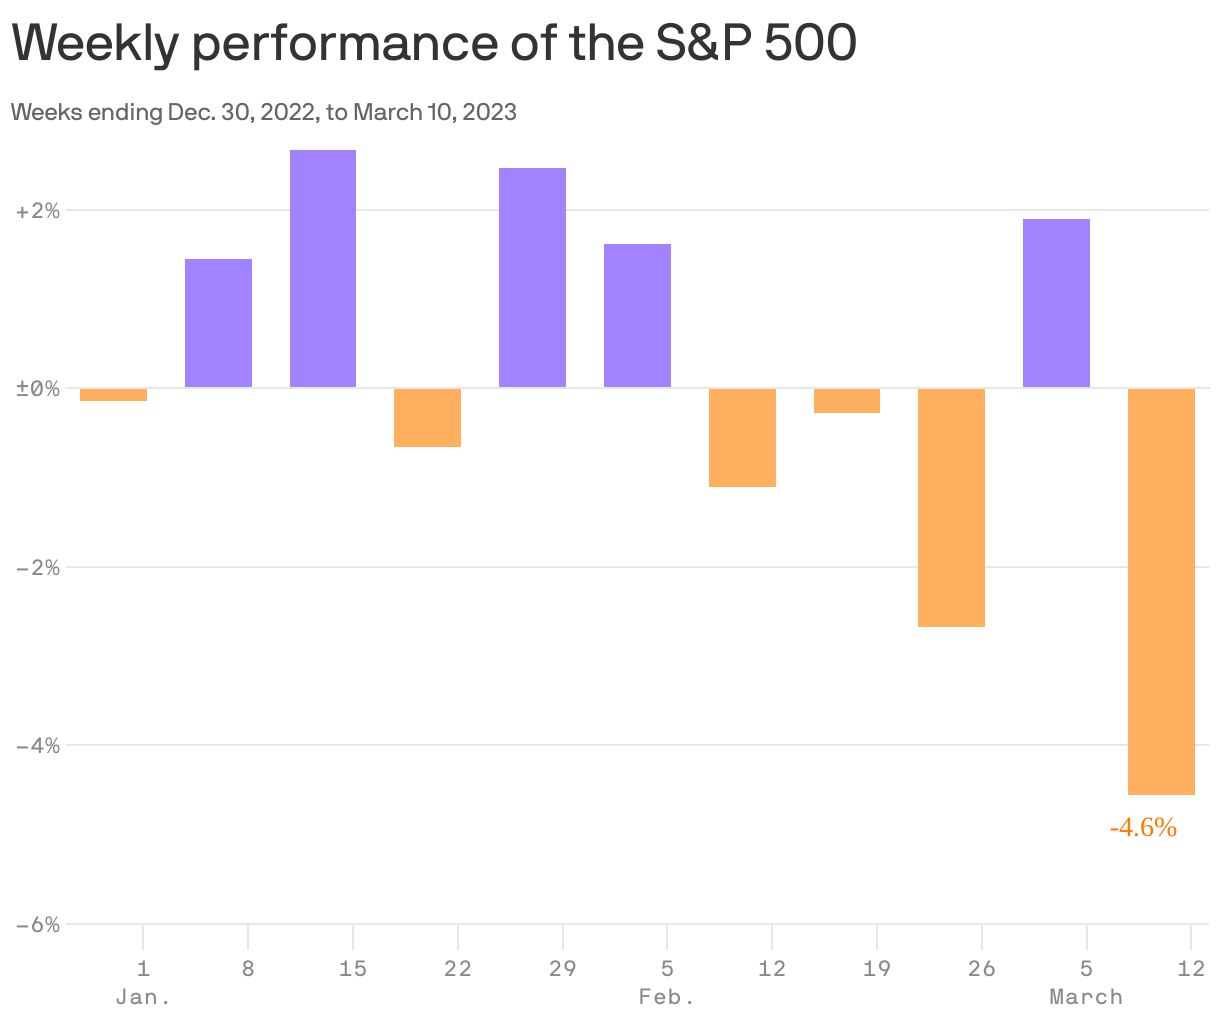 Weekly performance of the S&P 500